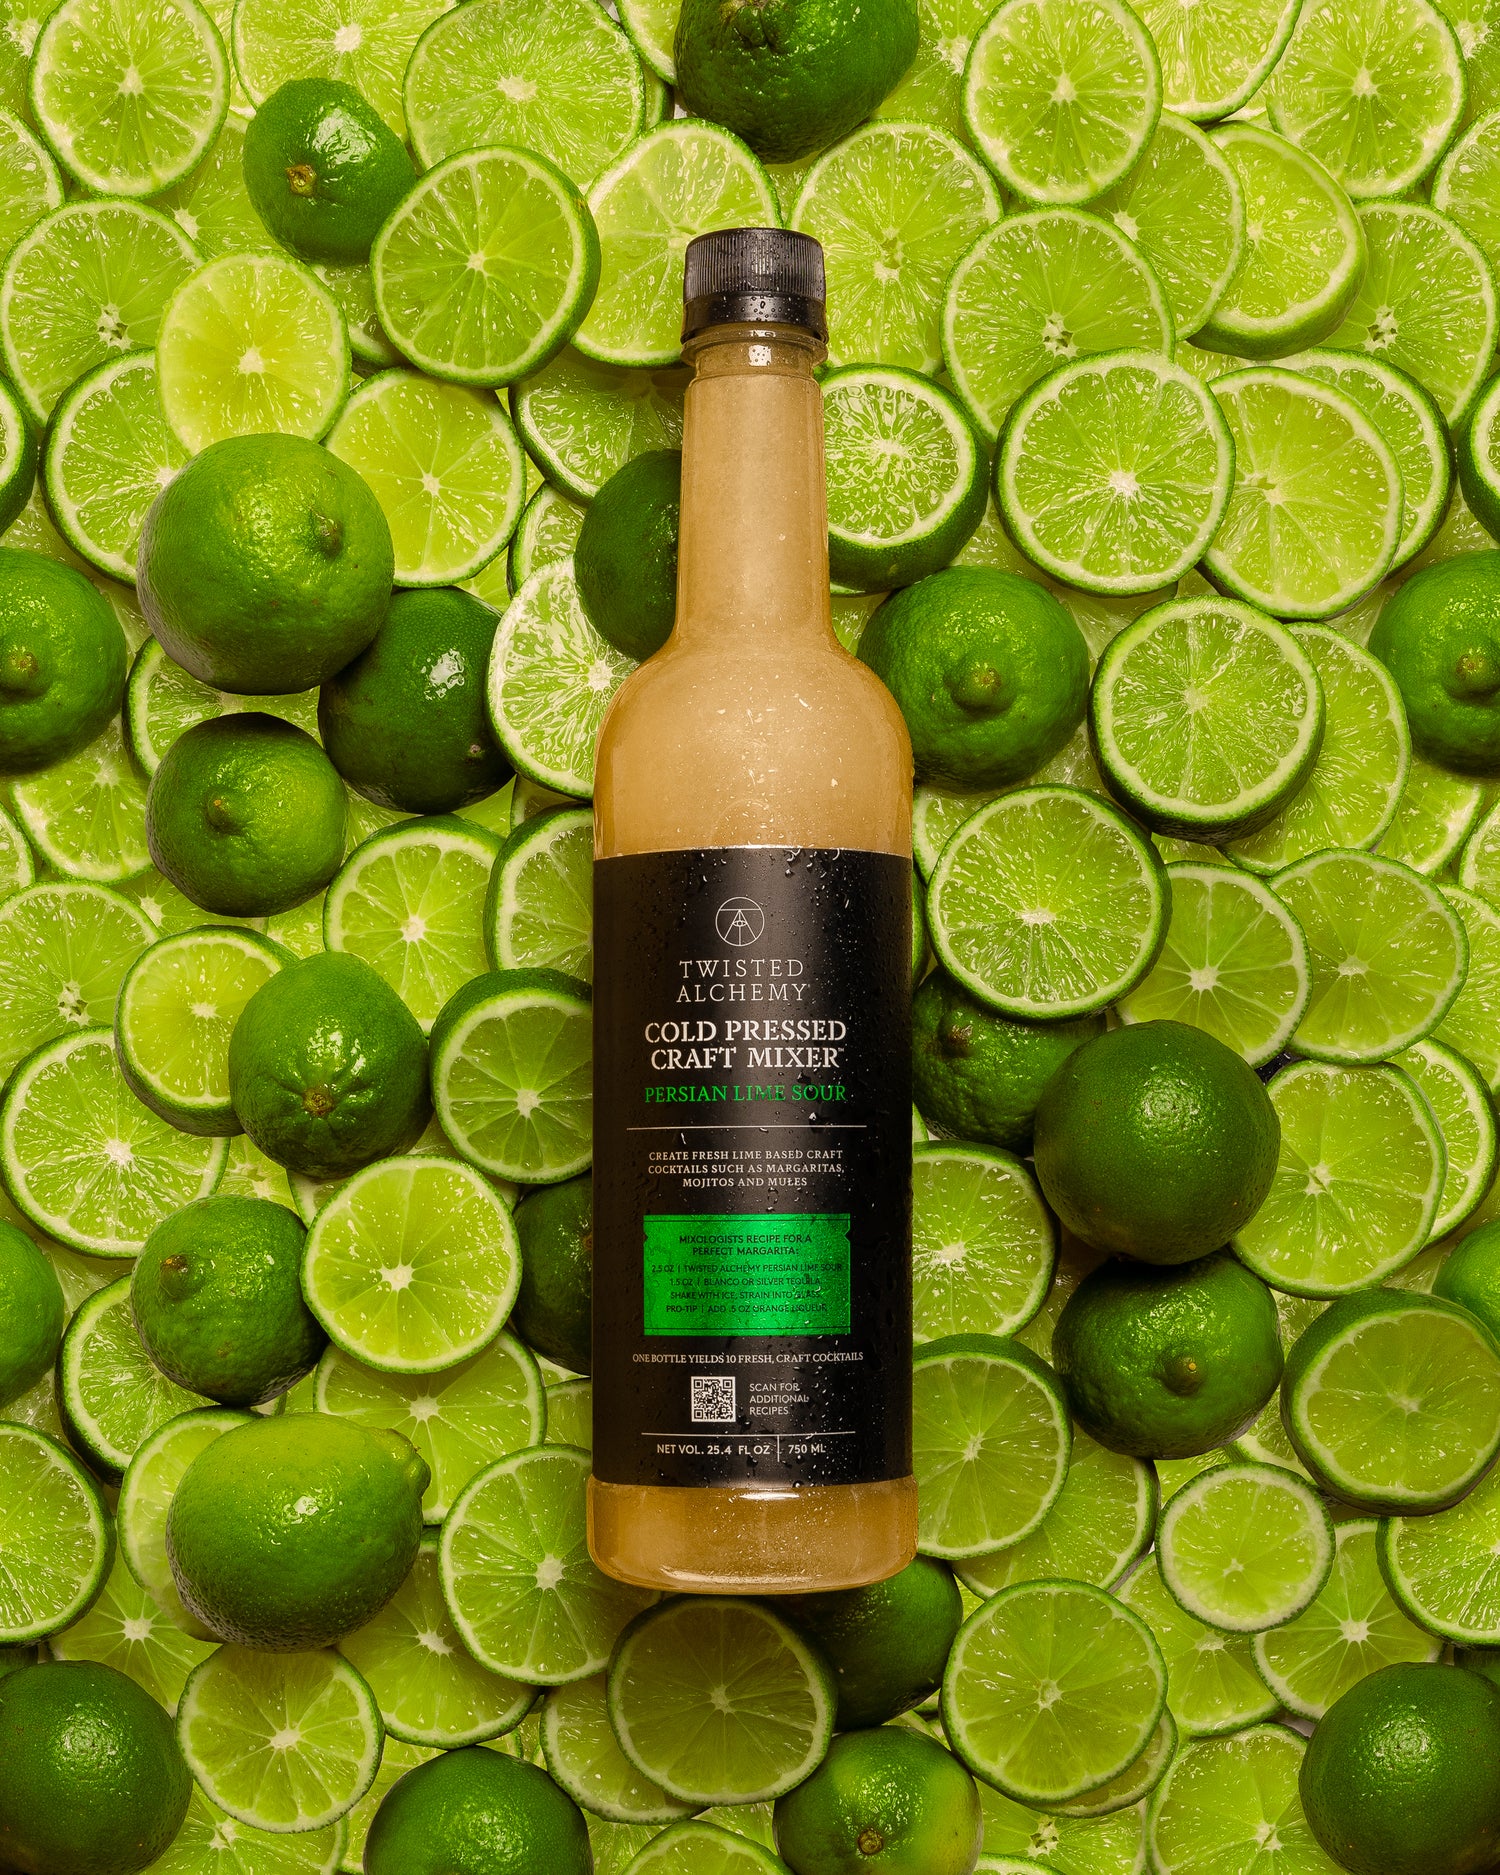 LIME BOTTLE ON BACKGROUND OF LIMES